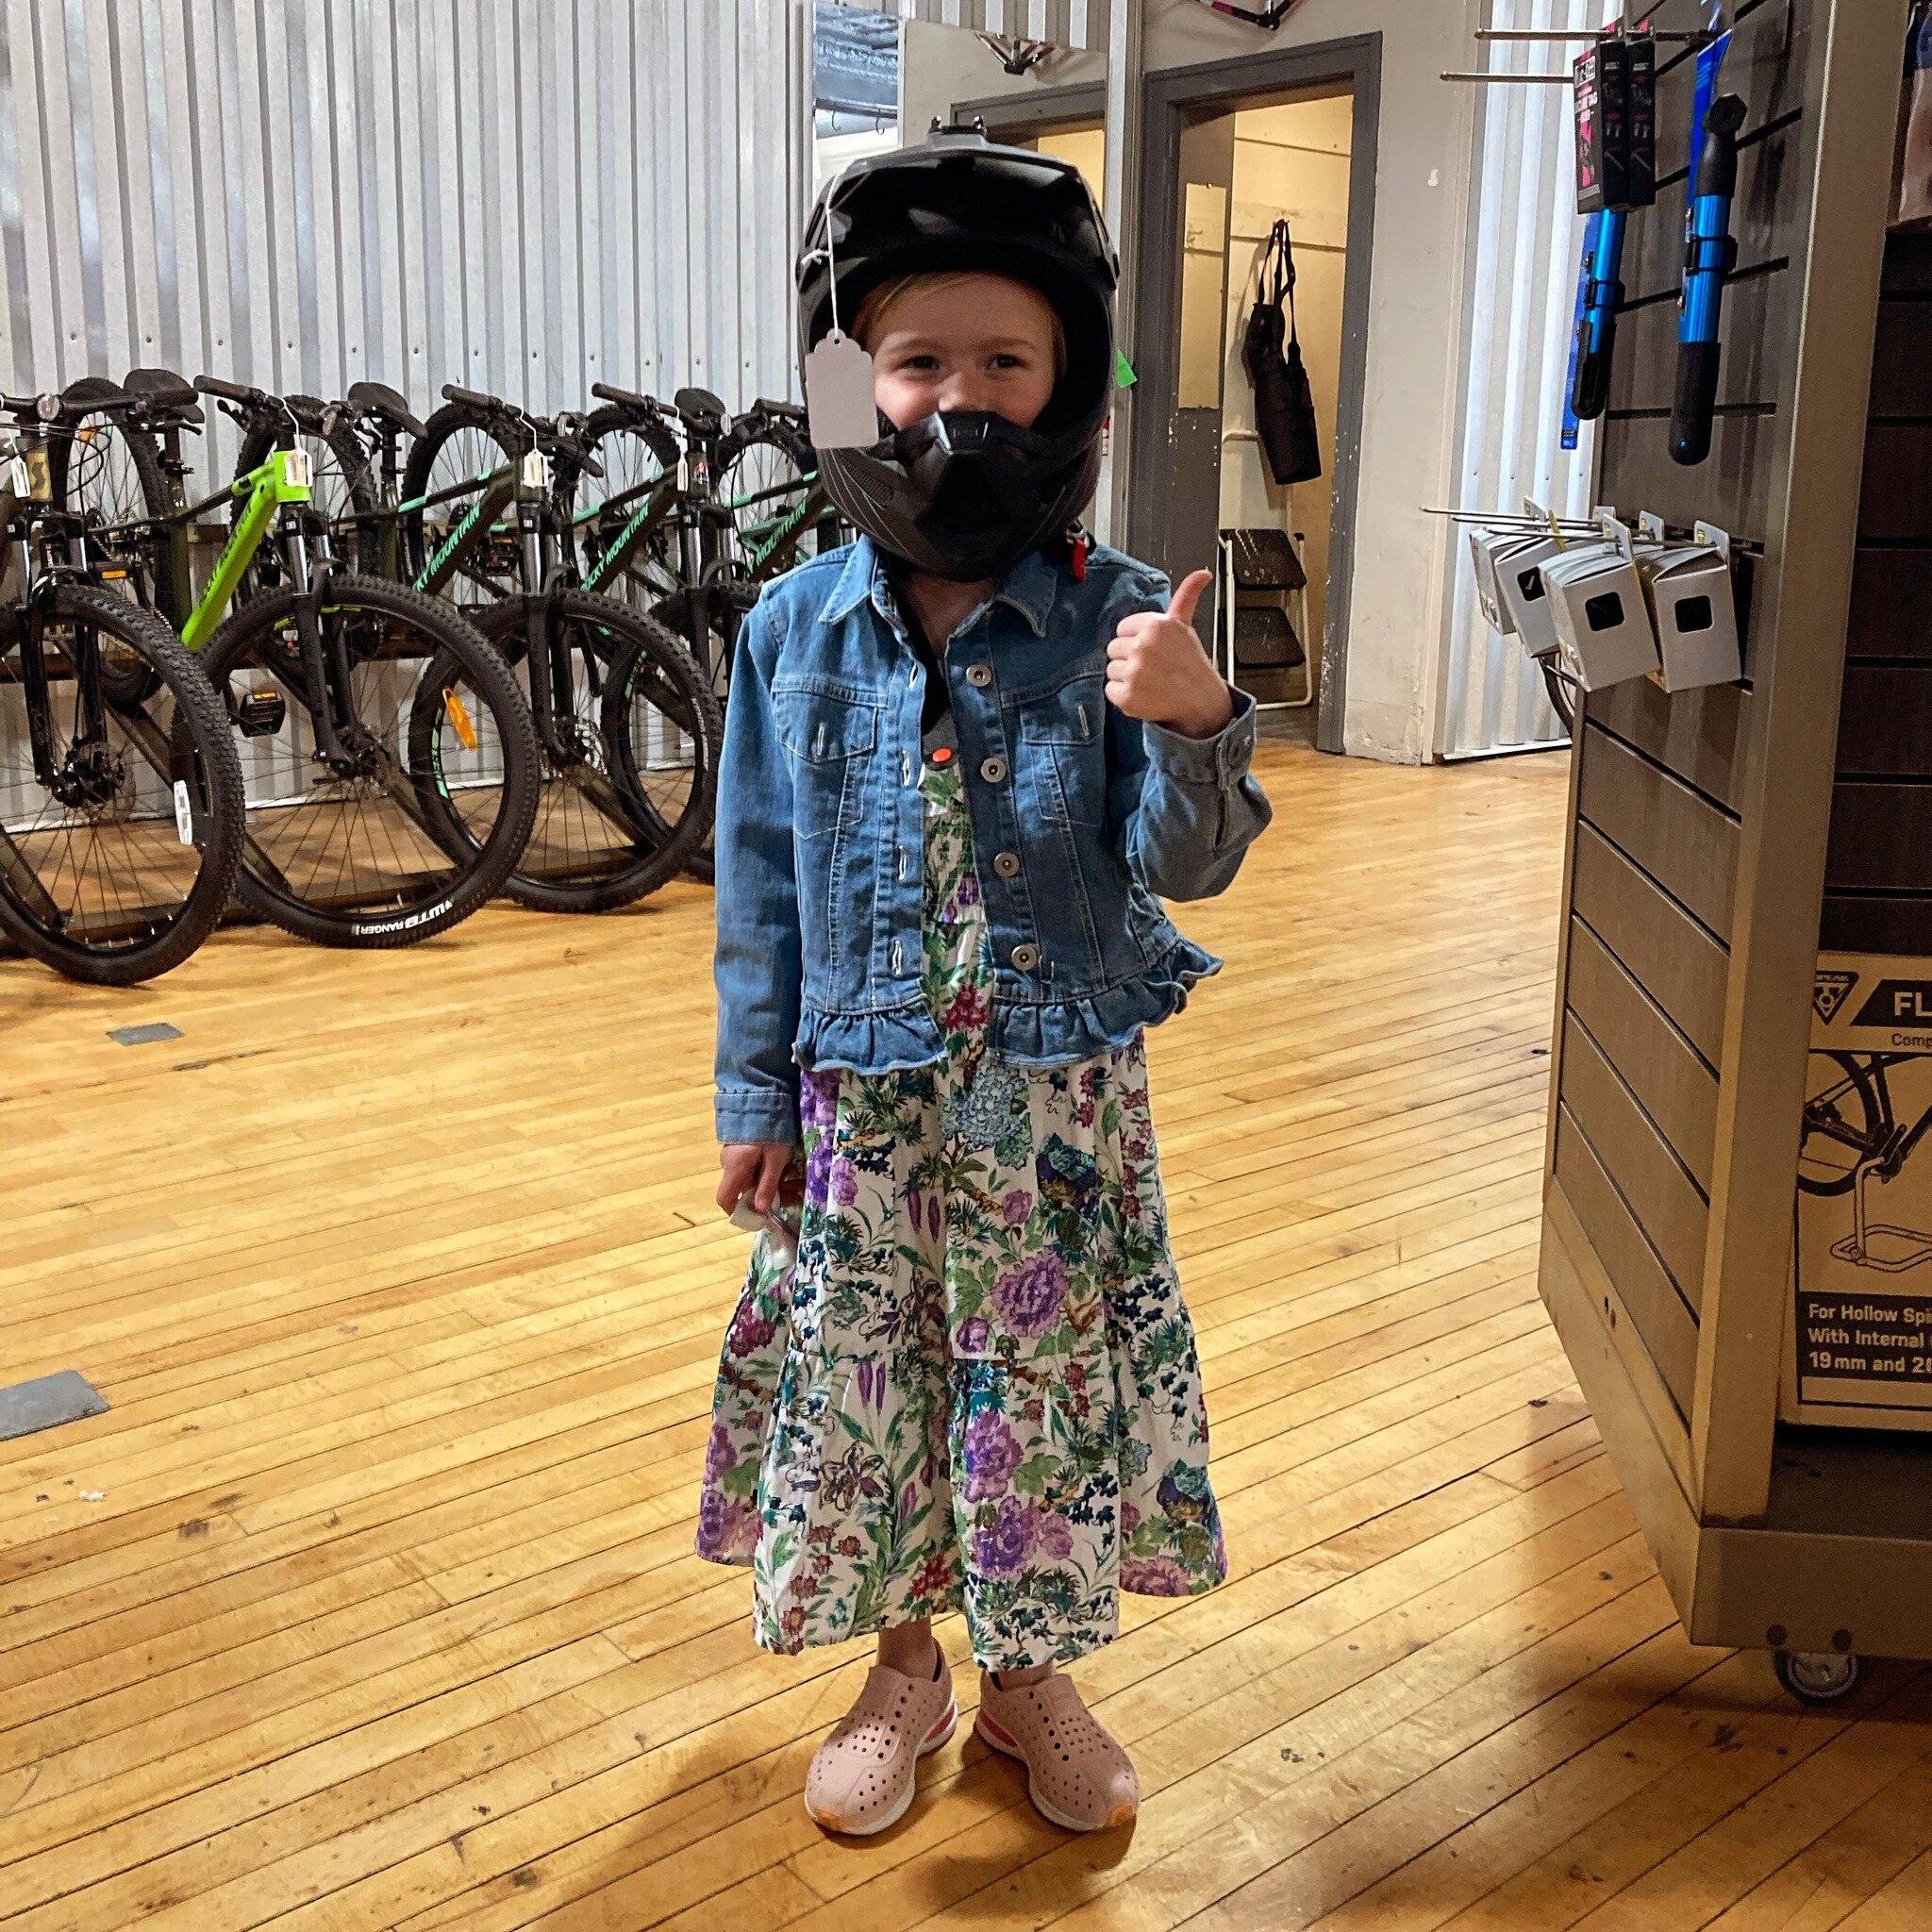 We had the raddest girl in our shop the other day!! She&rsquo;s ready for the wild wooded trails in her full face and she&rsquo;s also ready to enjoy the Sunday French Market! She&rsquo;s as rad and classy as it gets!! Have fun out there  kiddos!! #b